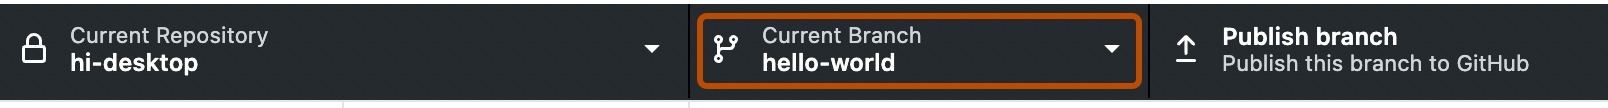 Screenshot of the repository bar. A button, labeled "Current Branch" with a downward arrow indicating a dropdown menu, is outlined in orange.